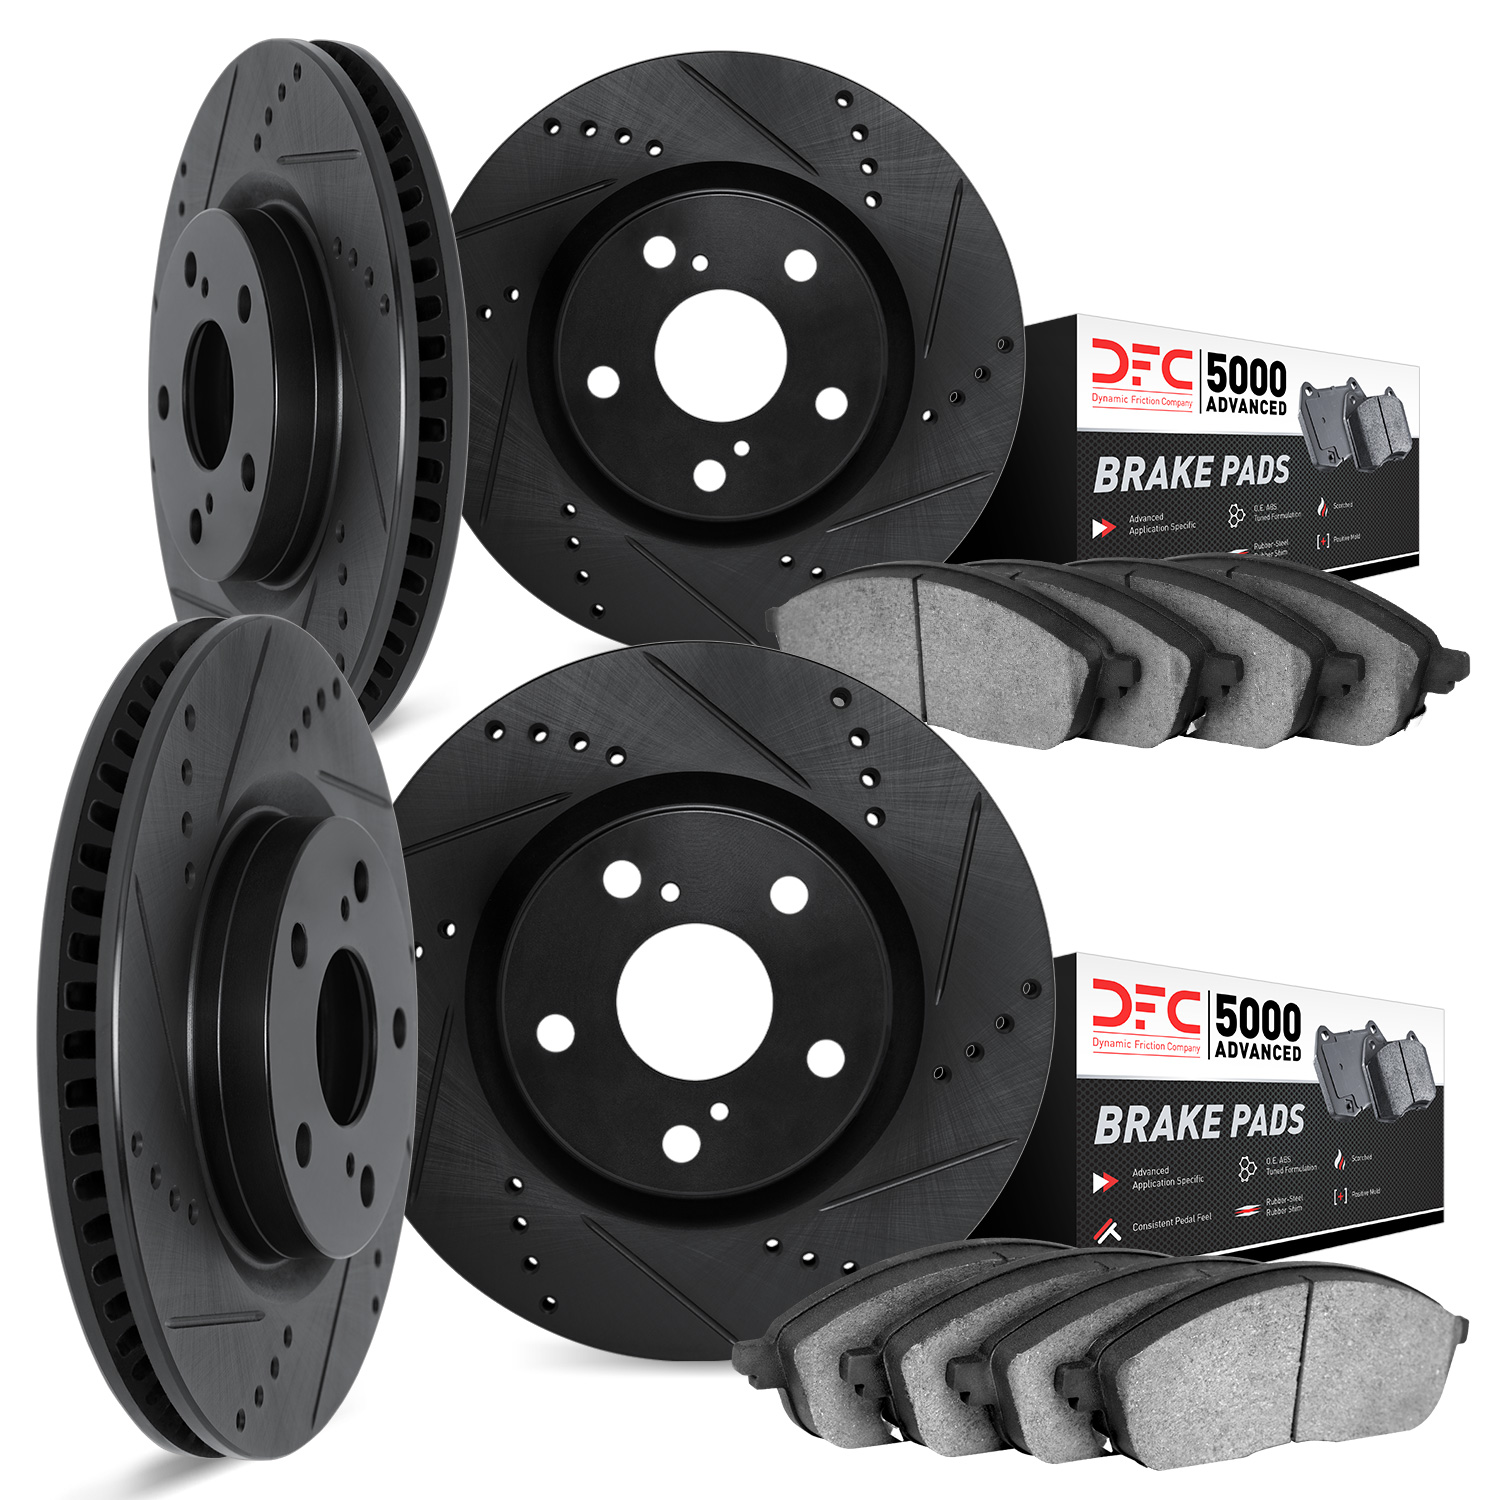 8504-39026 Drilled/Slotted Brake Rotors w/5000 Advanced Brake Pads Kit [Black], Fits Select Mopar, Position: Front and Rear